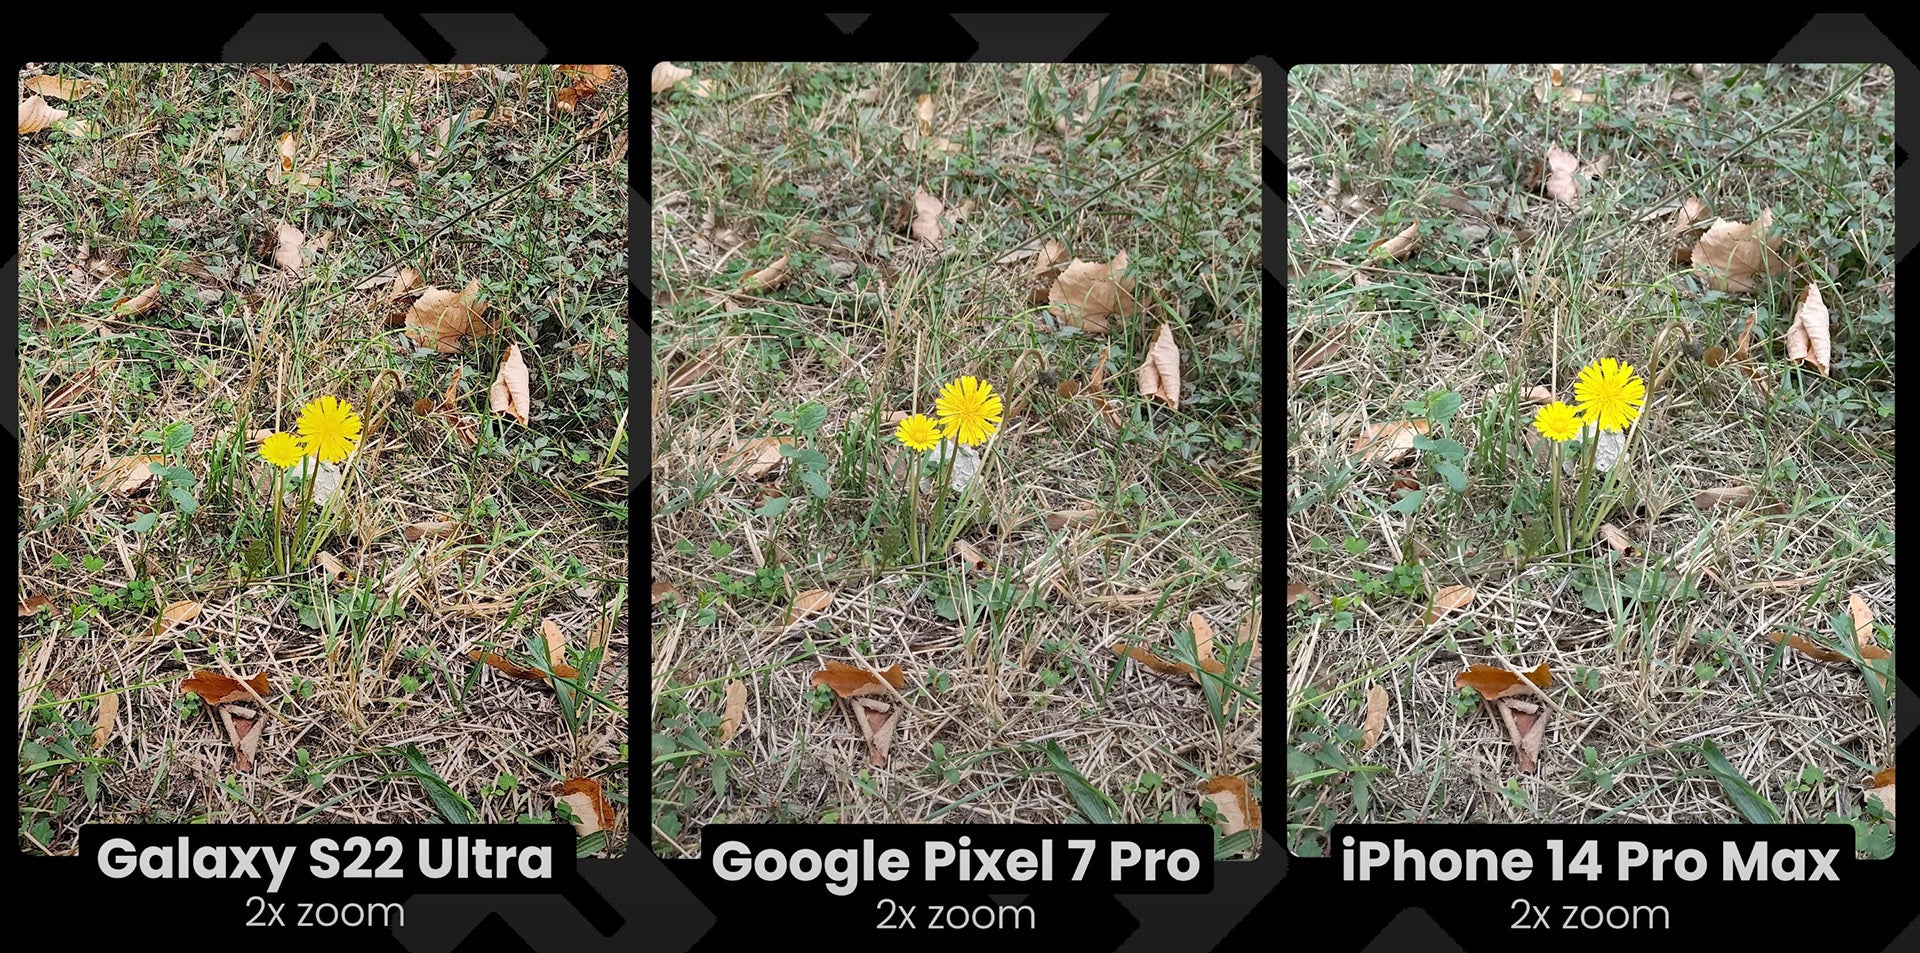 (Image Credit - PhoneArena) Despite having the highest resolution sensor, at 2X the Galaxy S22 Ultra captures less detail than the iPhone 14 Pro and Pixel 7 Pro - Samsung and Xiaomi taken by surprise, Apple's 2X camera too good